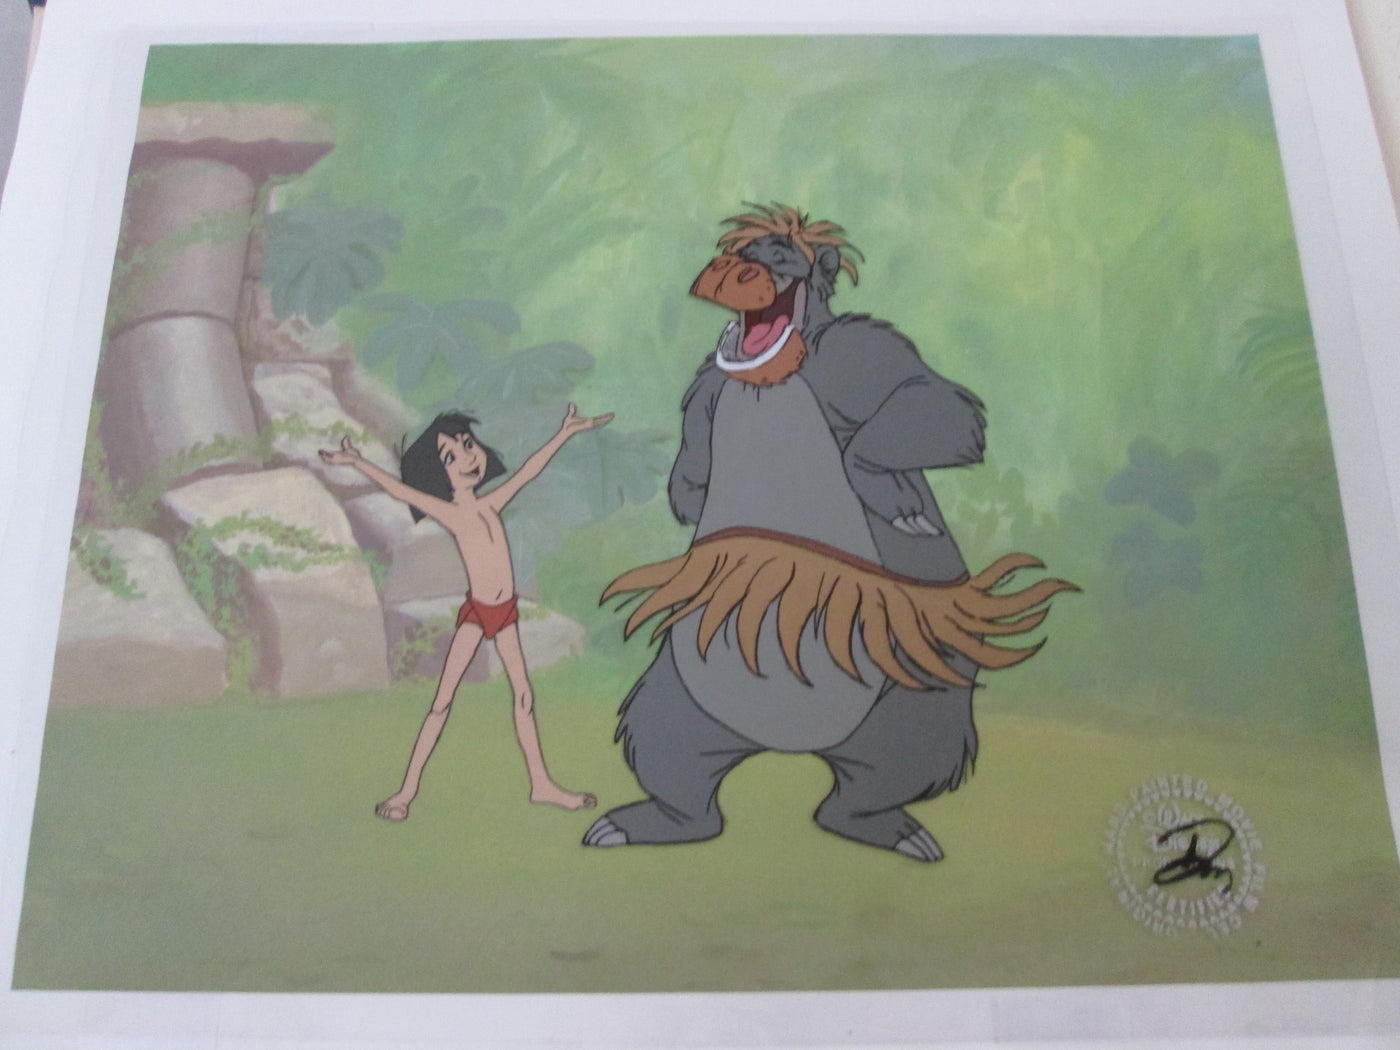 Original Walt Disney Production Cel from The Jungle Book featuring Mowgli and Baloo